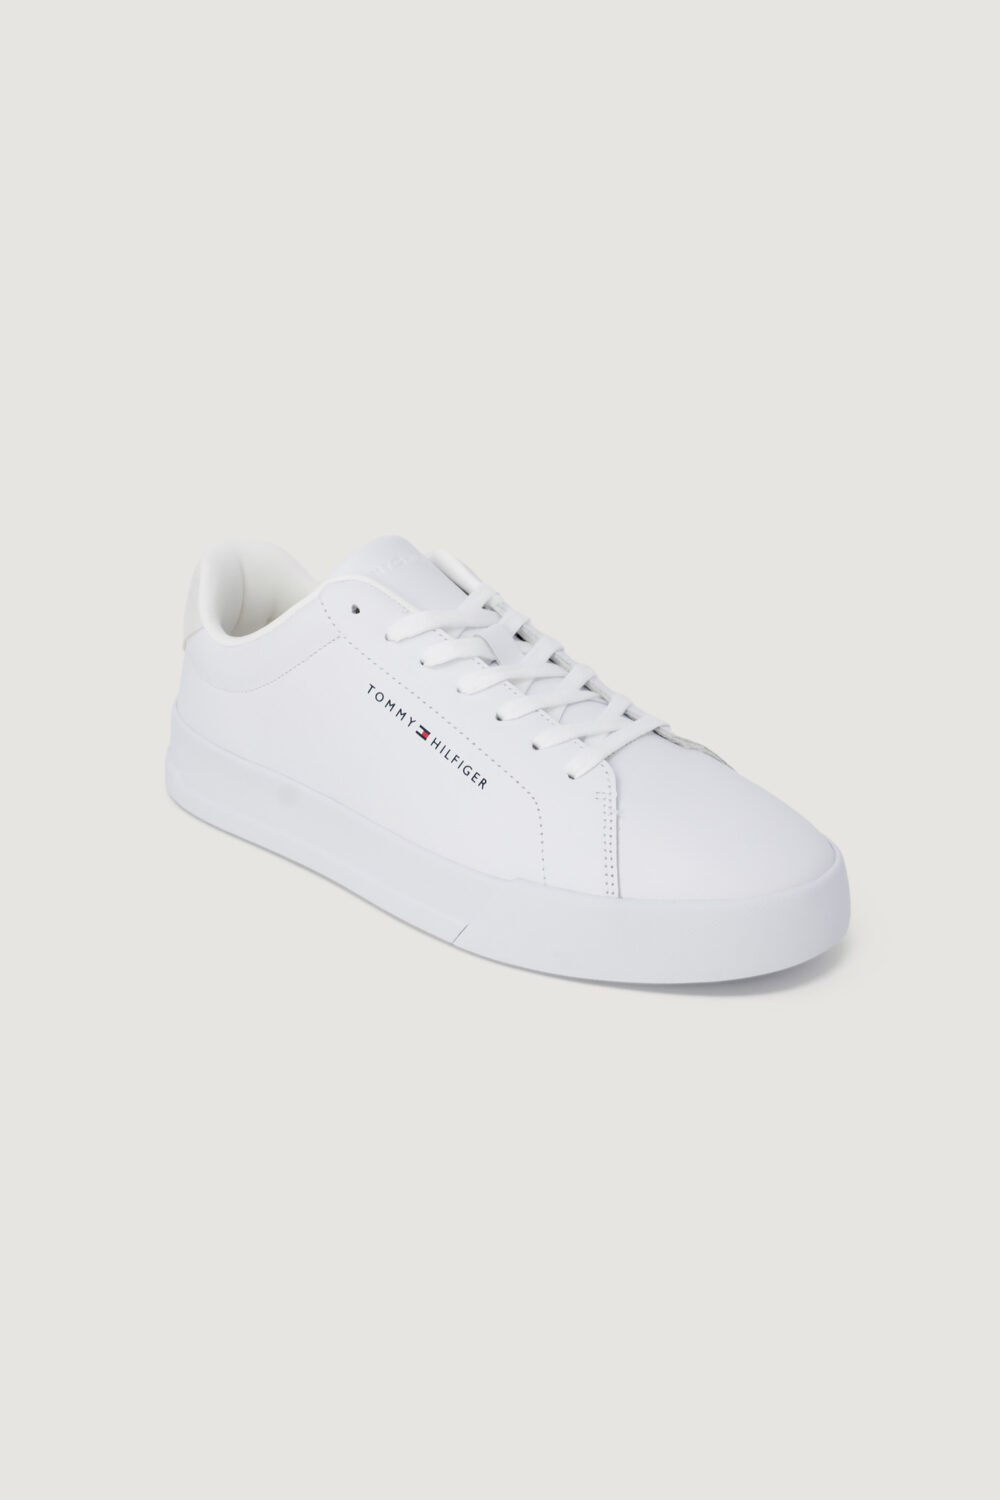 Sneakers Tommy Hilfiger COURT LEATHER Bianco - Foto 2